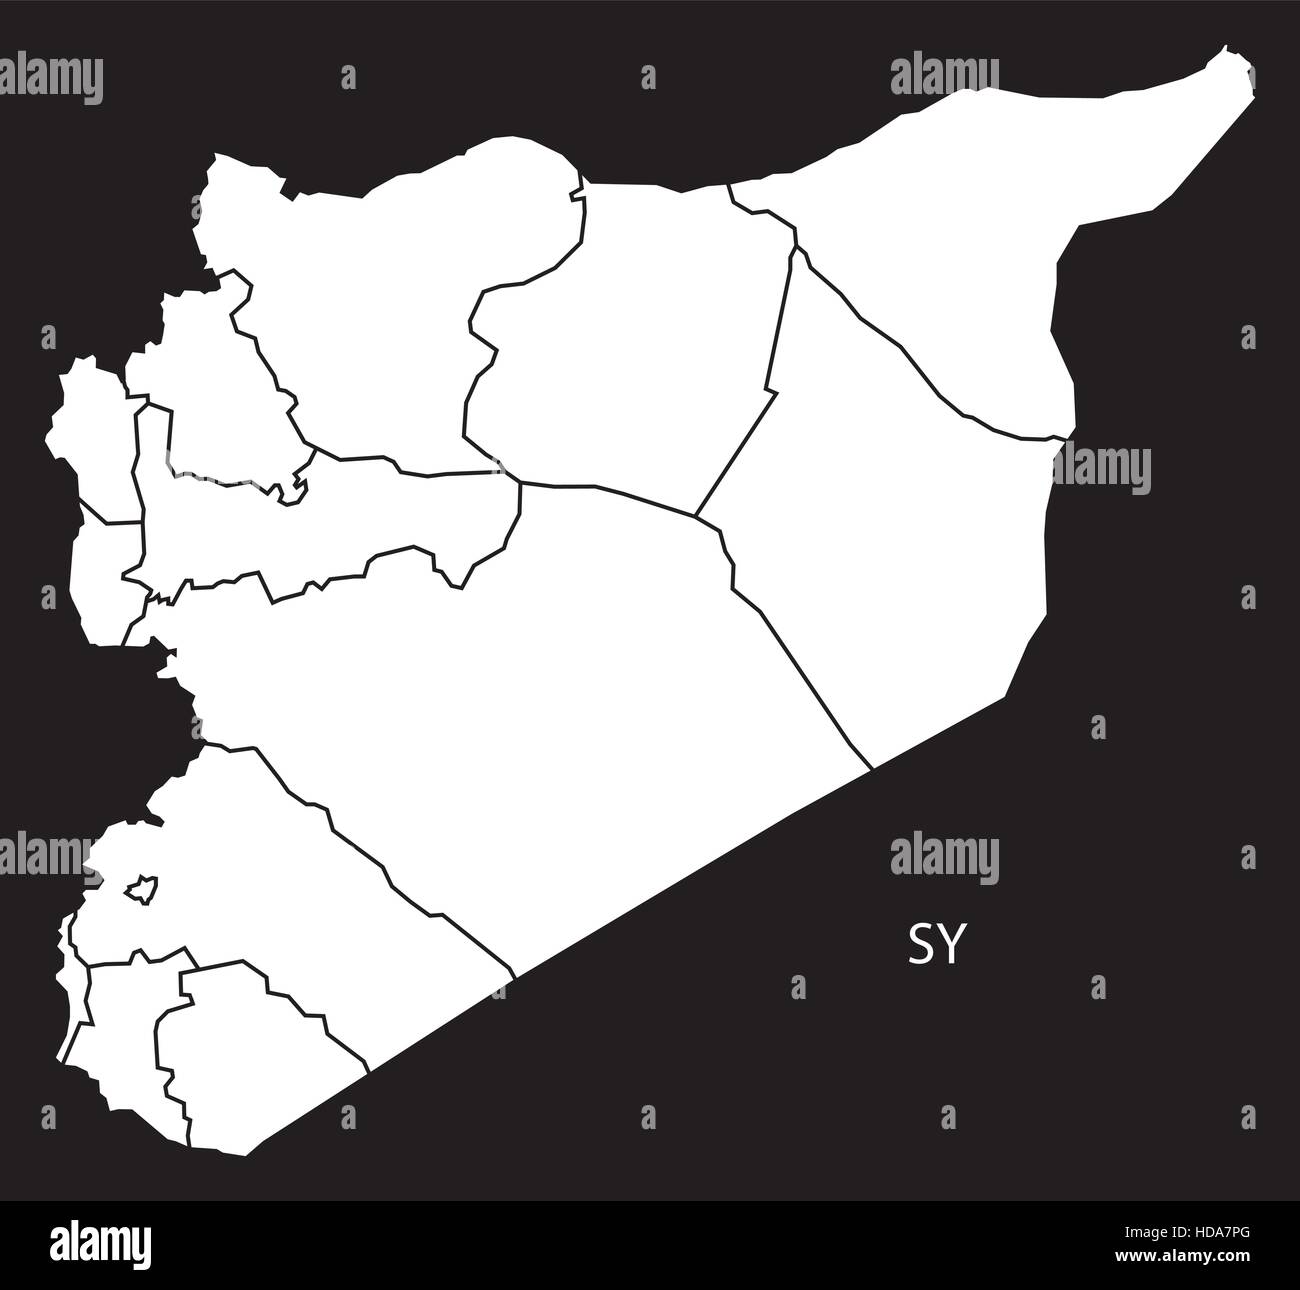 Syria governorates Map black and white illustration Stock Vector